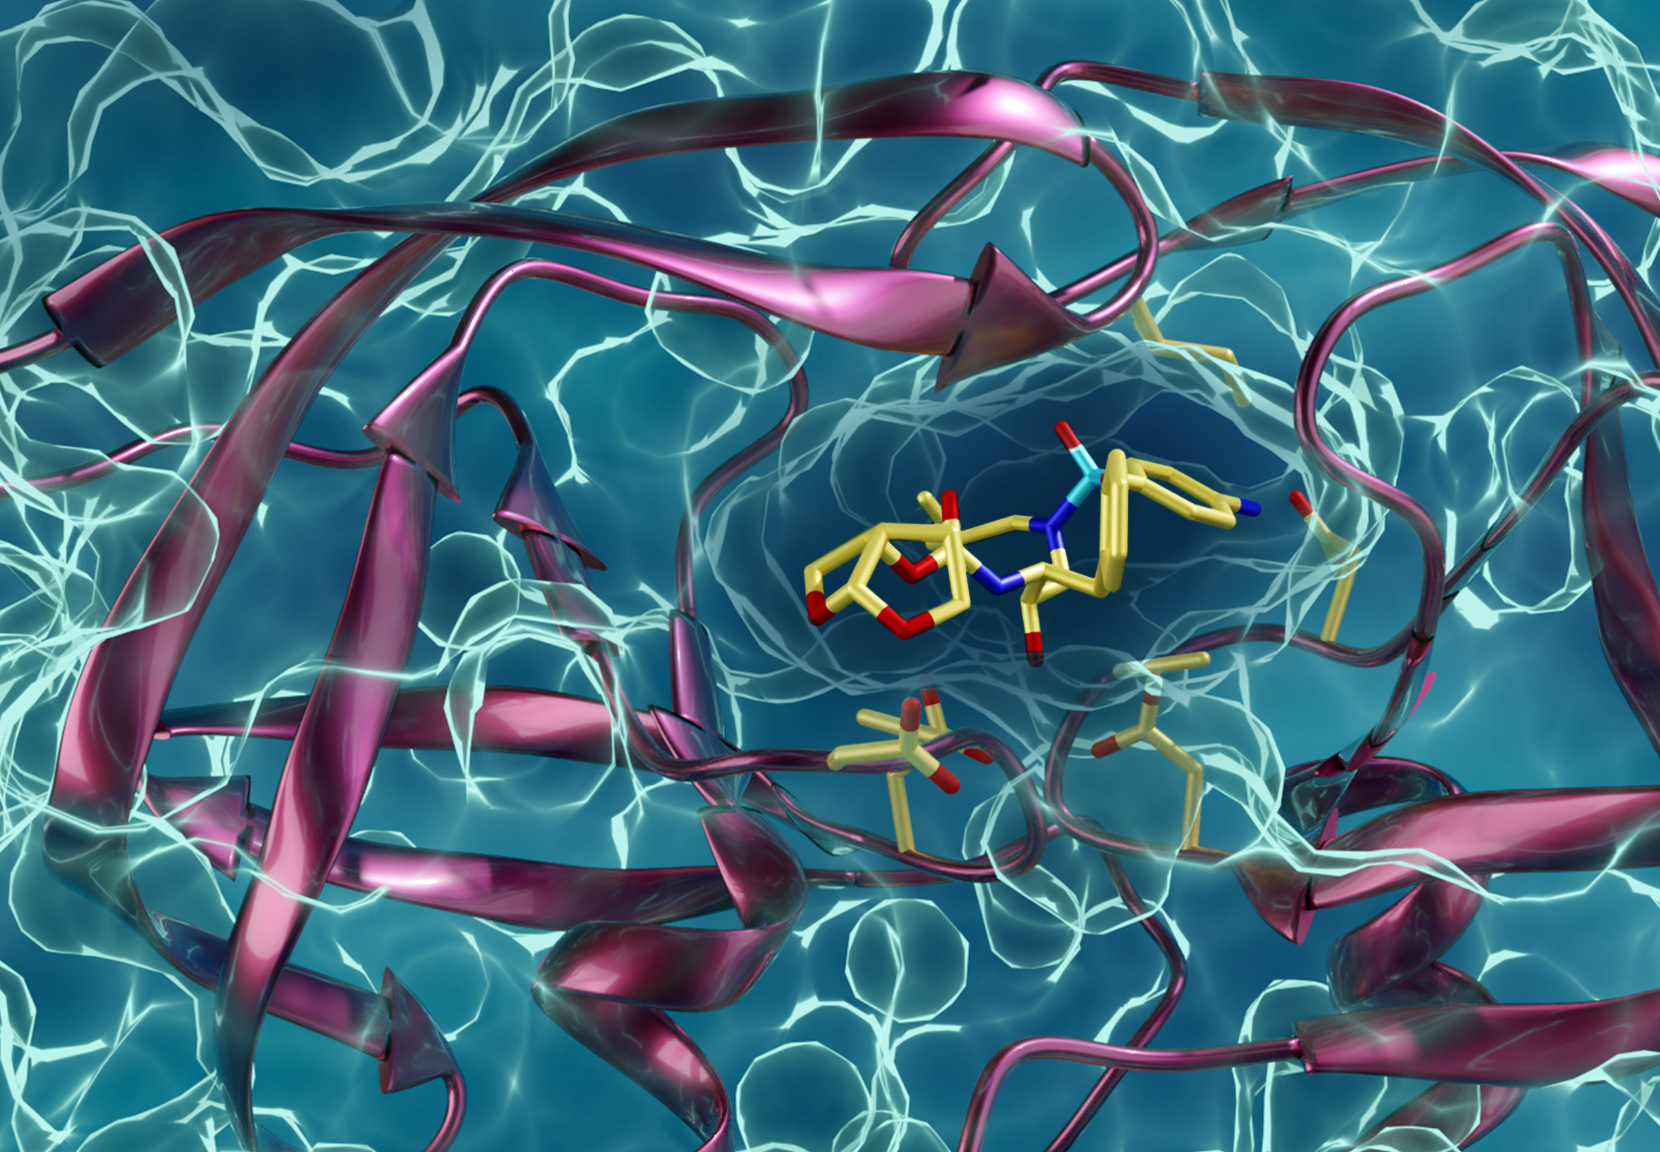 A drug-resistant type of HIV protease interacting with an HIV protease inhibitor. Kneller and Kovalevsky hope the same techniques they’ve used to learn more about HIV will also help fellow researchers battle COVID-19. (credit: ORNL/Jill Hemman)